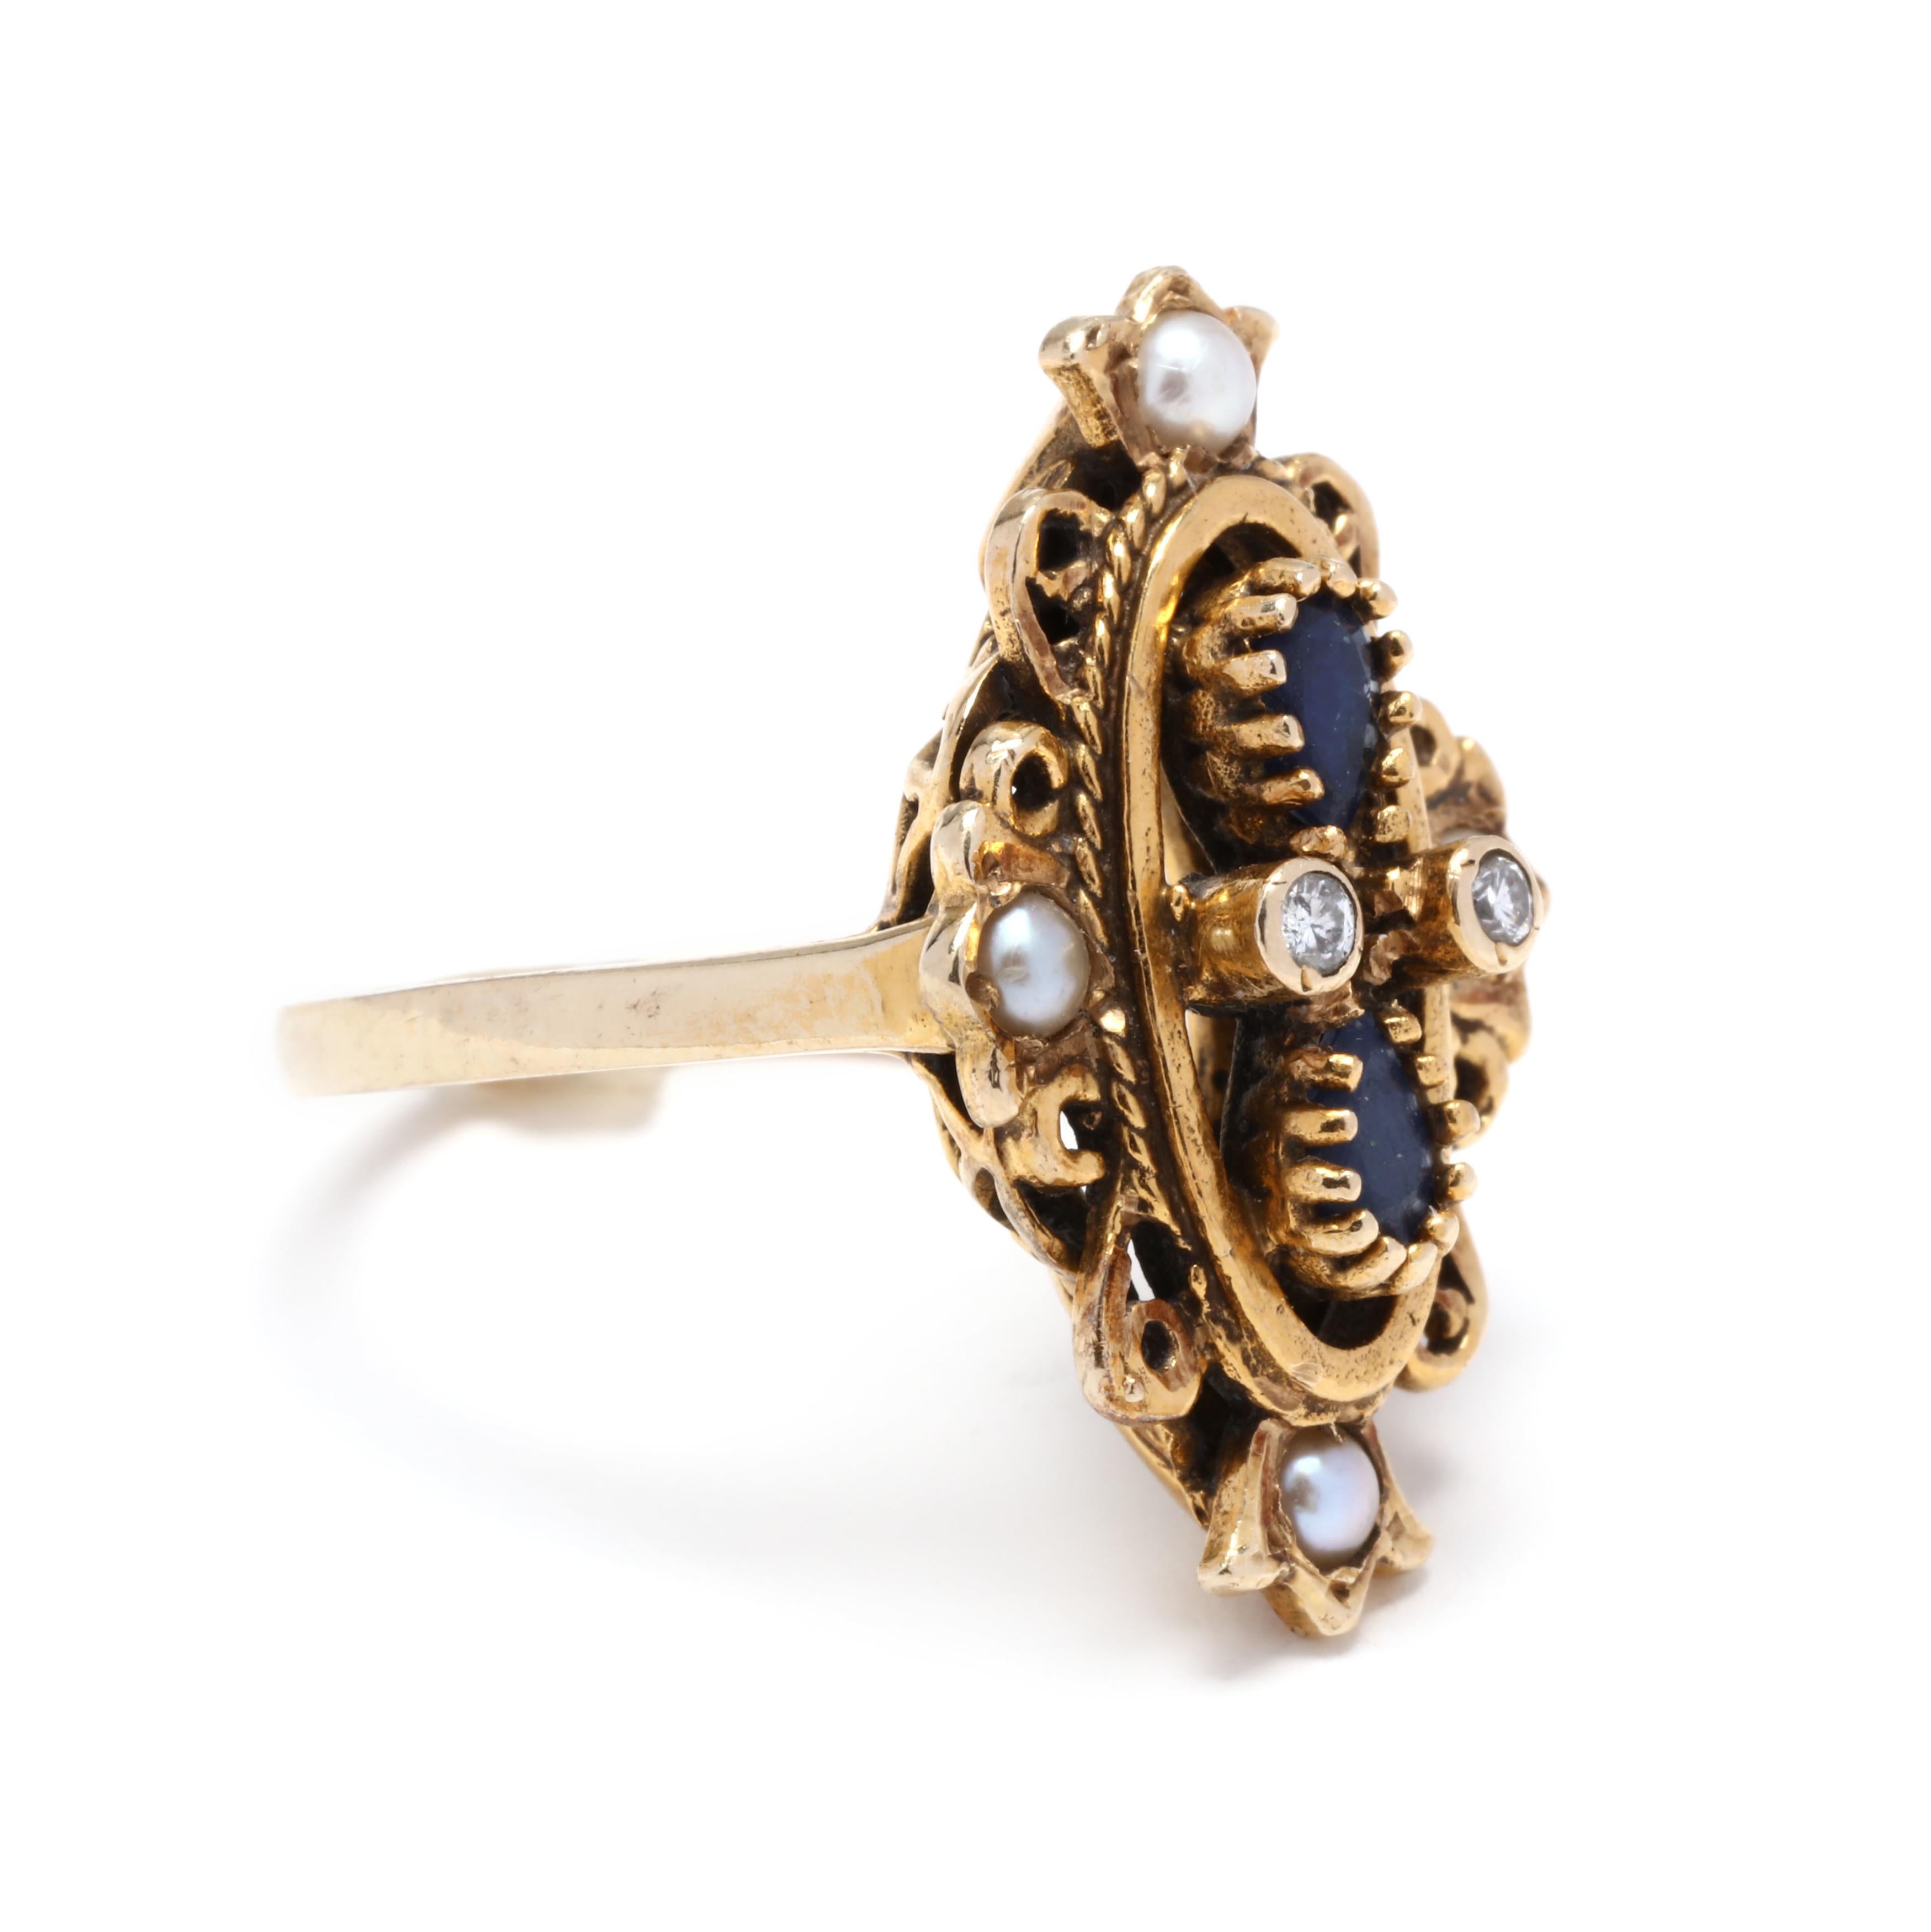 A vintage 14 karat yellow gold sapphire, diamond and pearl navette scroll ring. This ring features a marquise navette shape with two prong set, pear shape sapphires with the points facing each other, with two bezel set, round brilliant cut diamonds